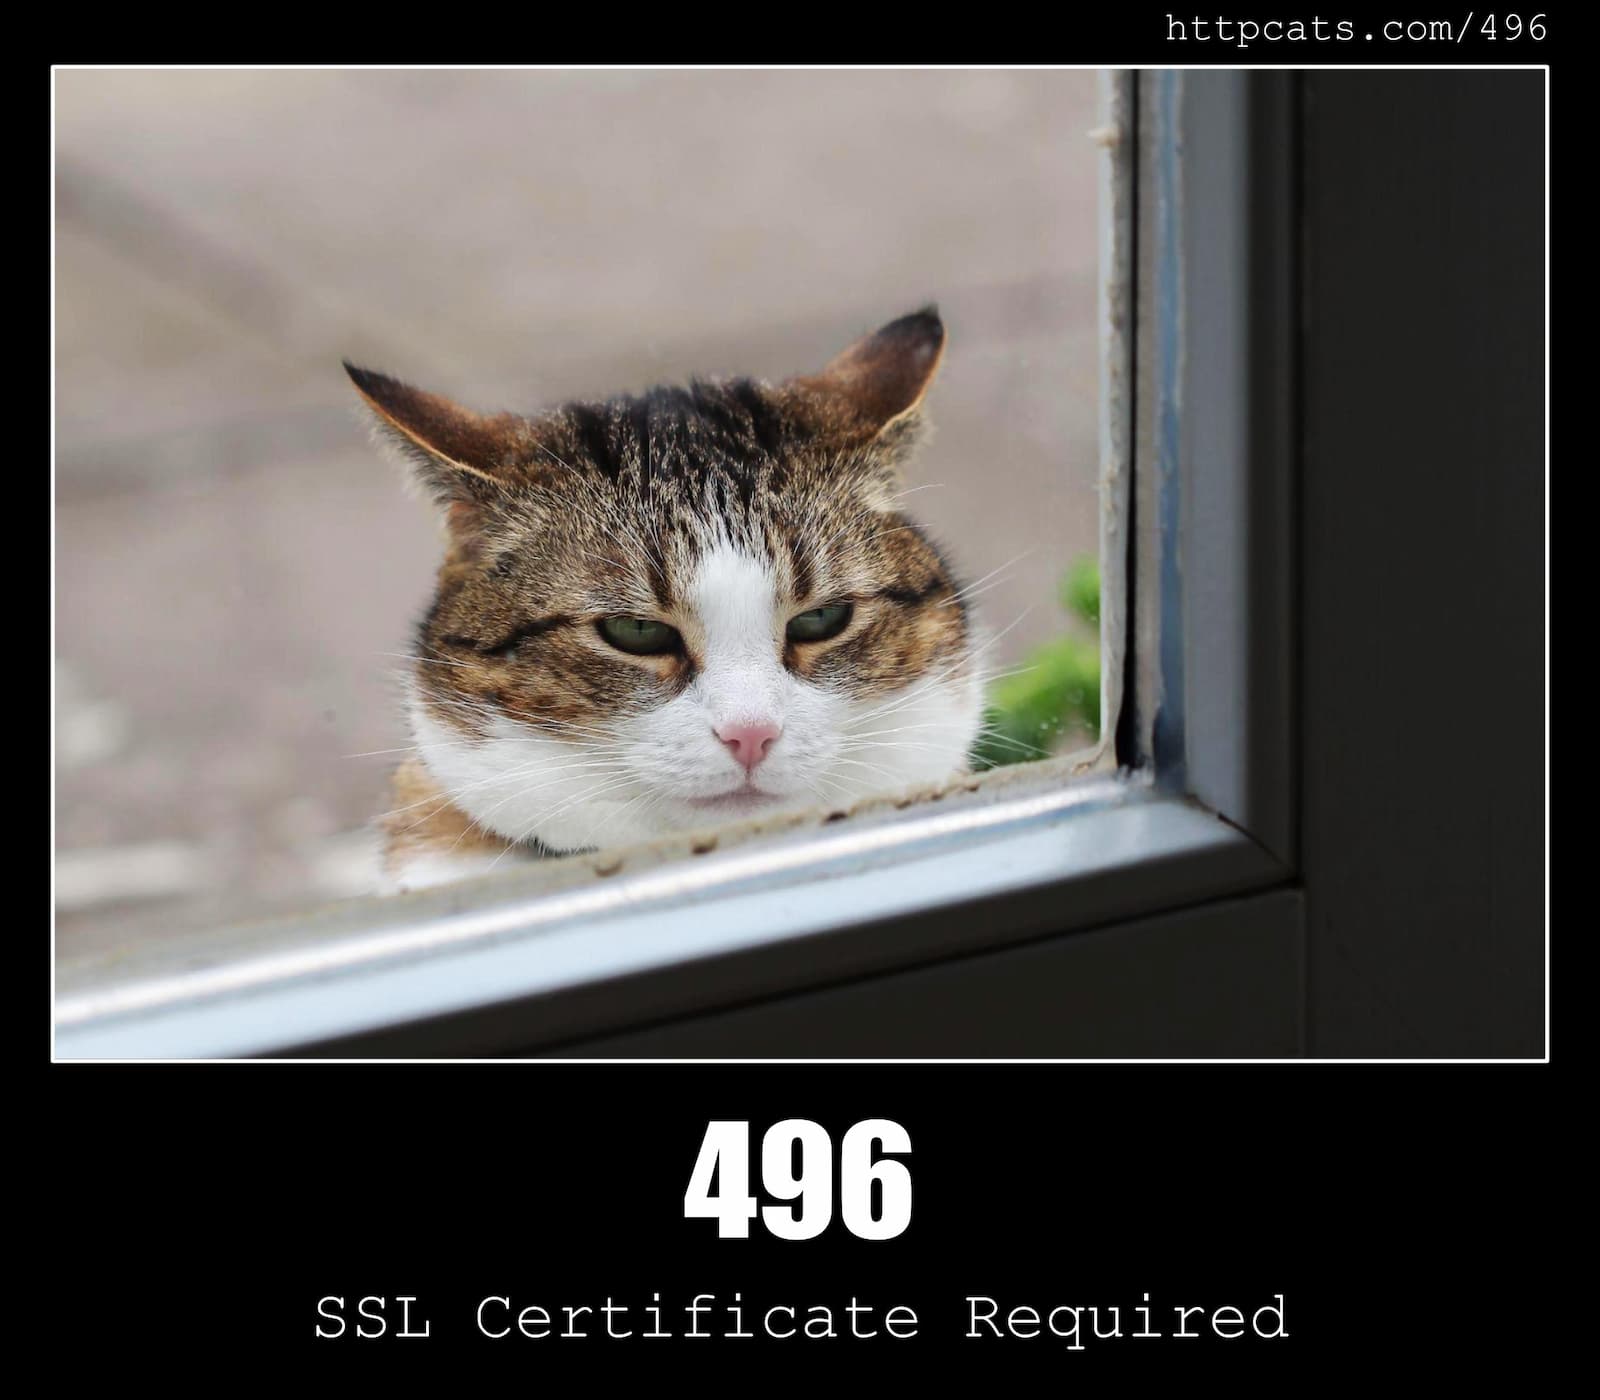 HTTP Status Code 496 SSL Certificate Required & Cats